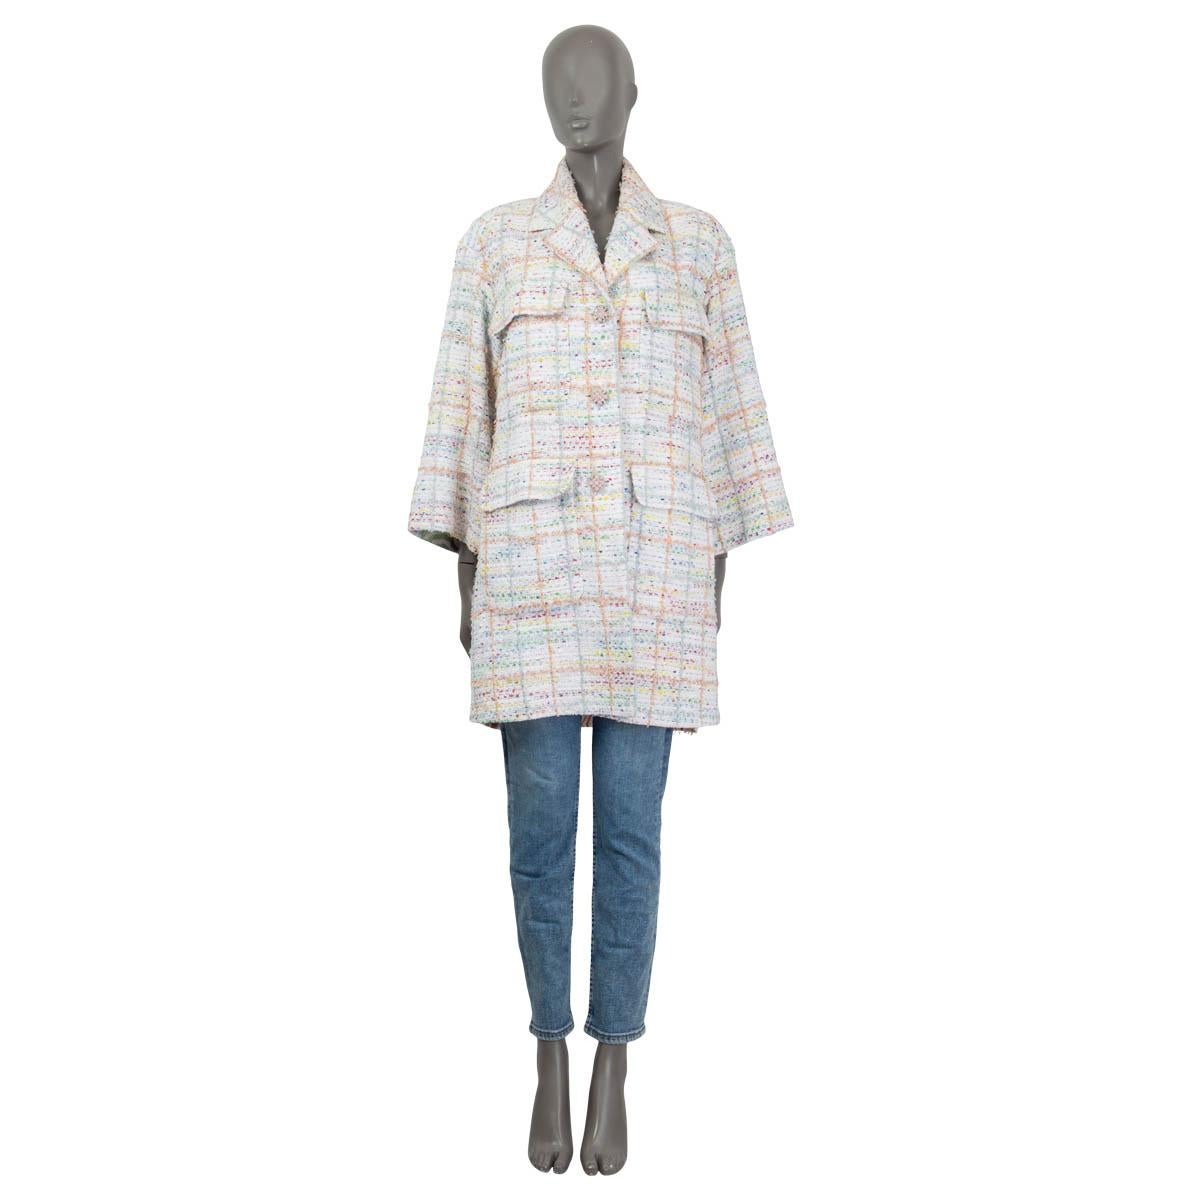 100% authentic Chanel 2019 oversized side-zip coat in white, yellow, blue, green, orange and pink cotton (52%), polyamide (44%), acrylic (3%) and viscose (1%) tweed. Jacket has three crystal and stone embellished buttons at front and four flap